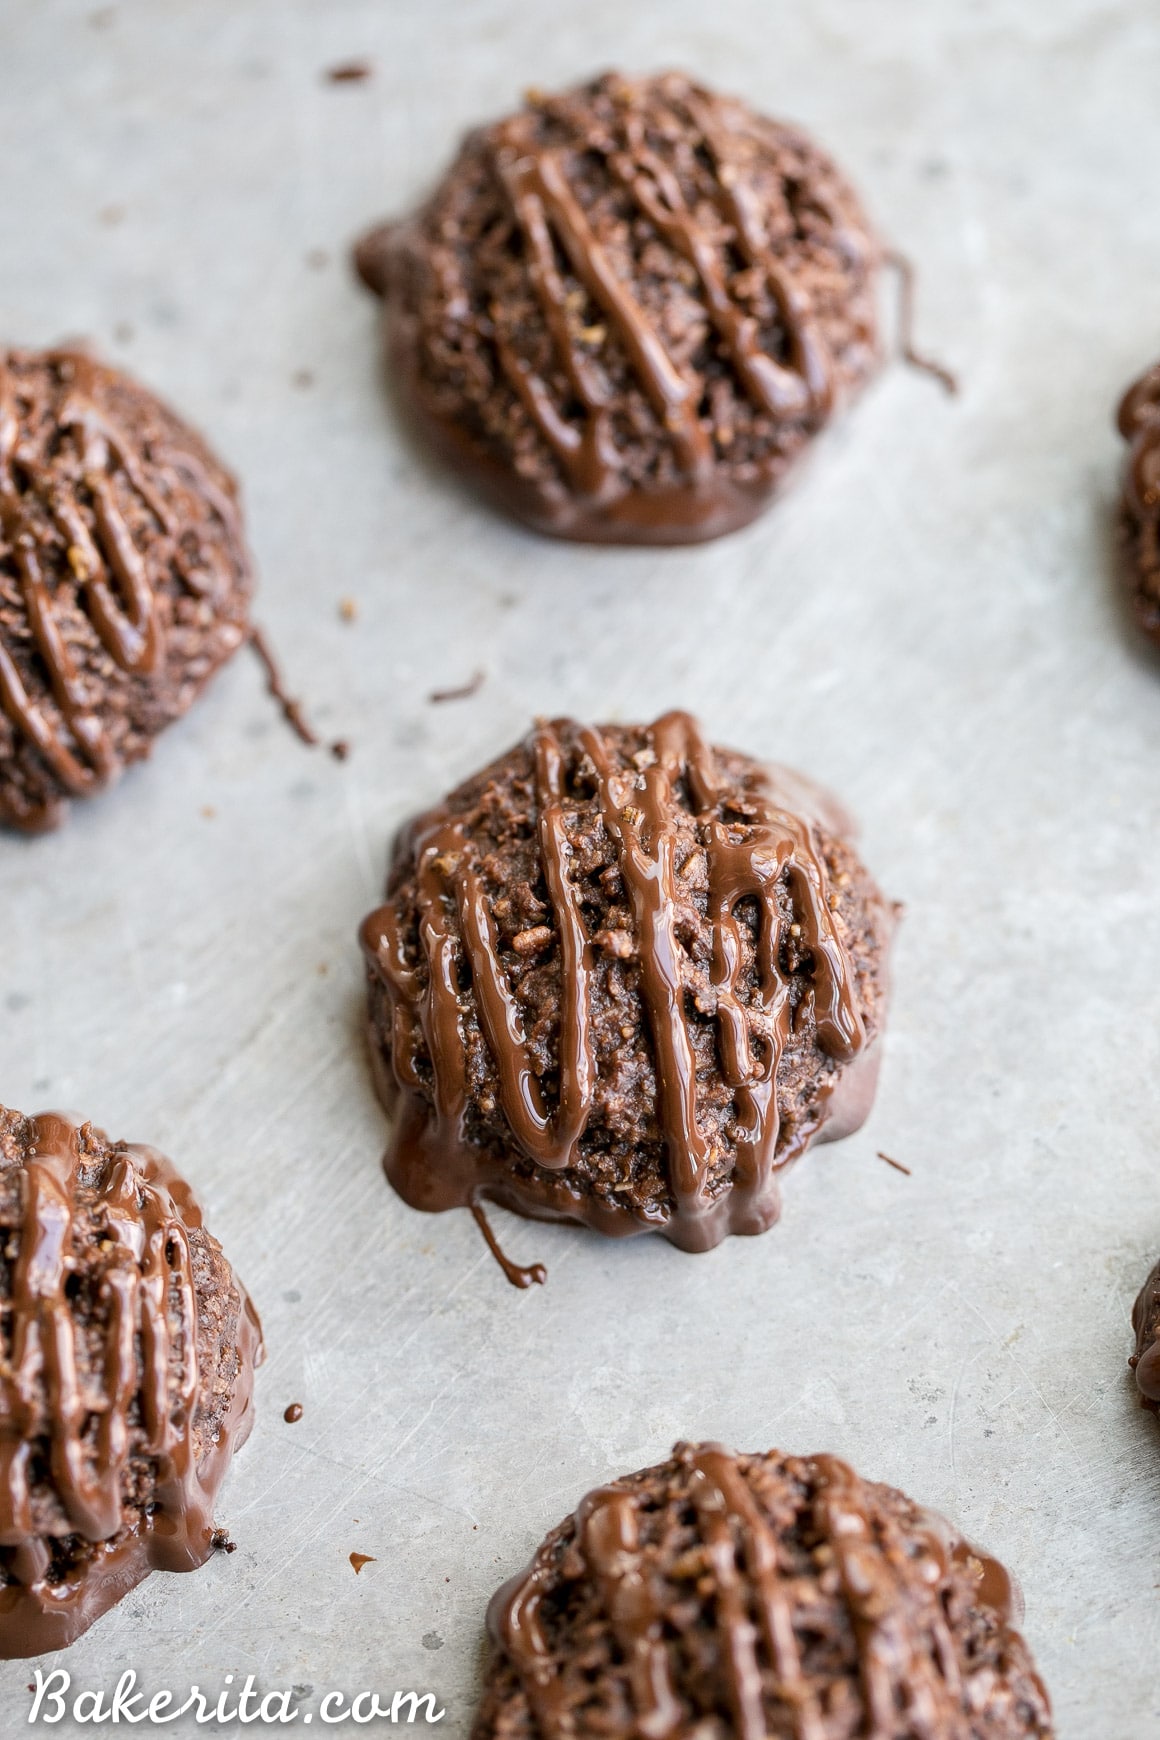 These rich Double Chocolate Macaroons are made super chocolatey with both cocoa powder and melted chocolate. These easy cookies are dipped and drizzled with chocolate, and they're gluten-free, Paleo + vegan.